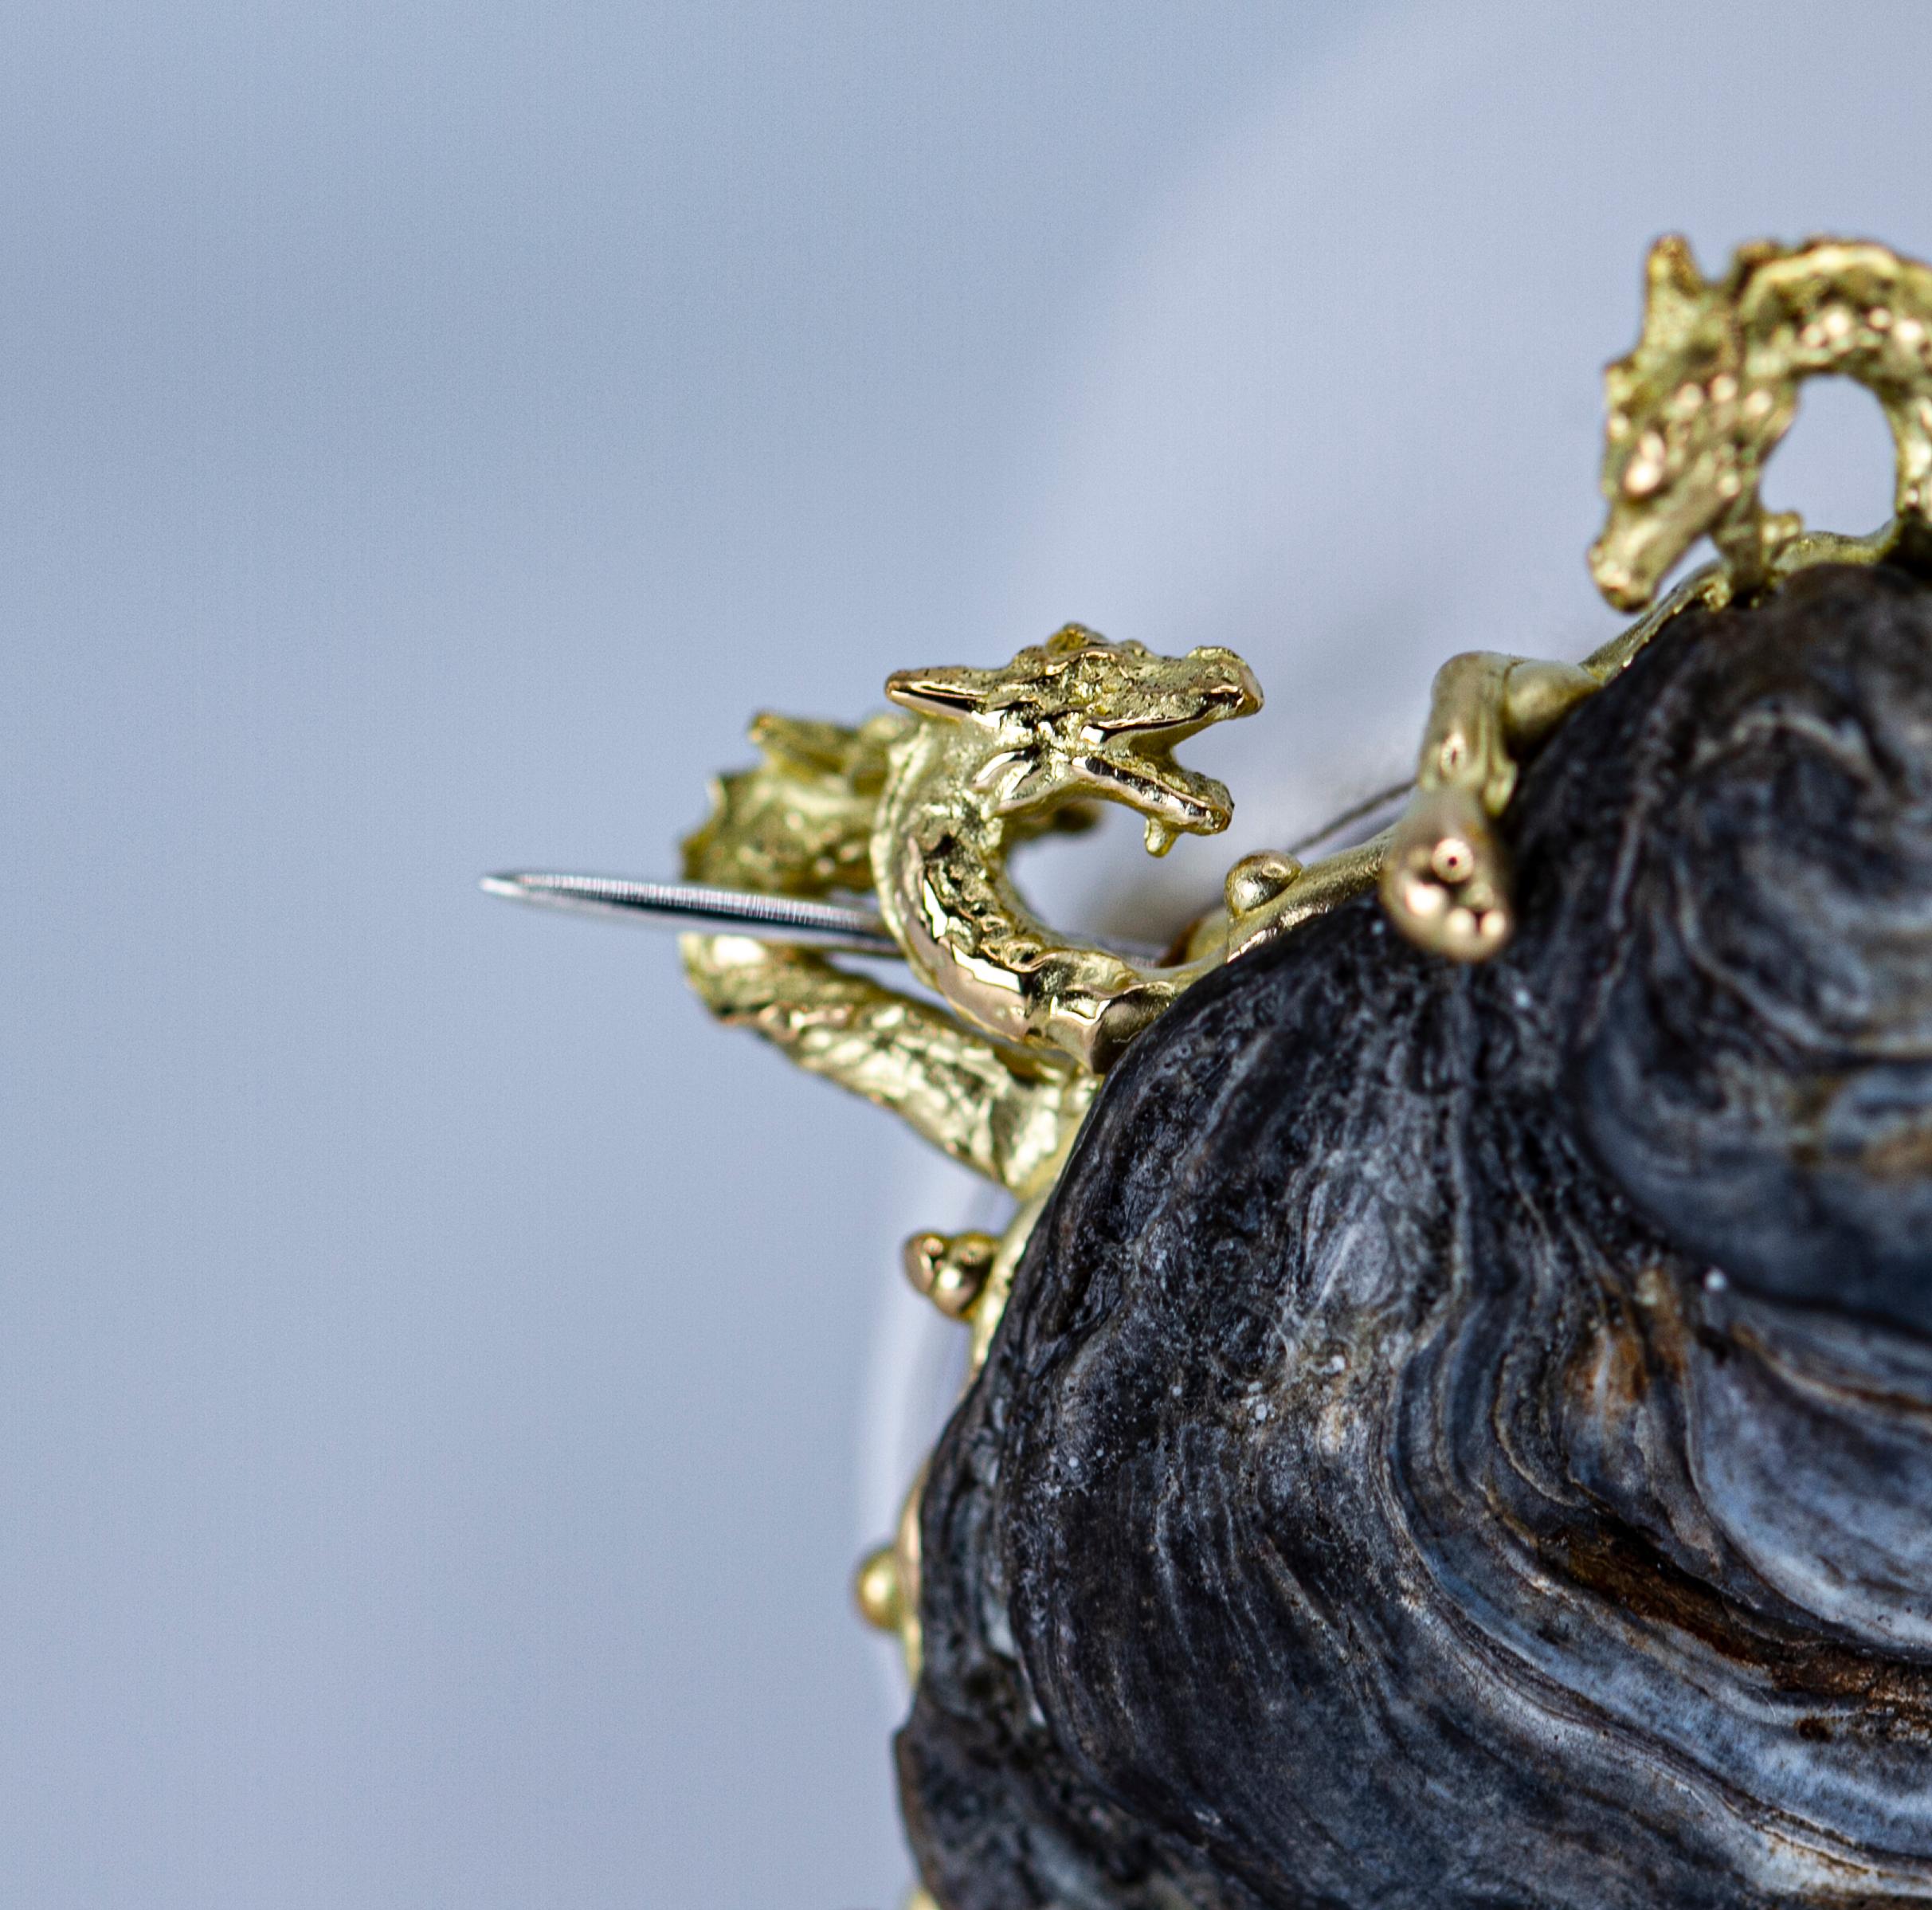 Women's or Men's Dragon Scale Brooch 18k Gold and Silver by Binliang Alexander Peng For Sale